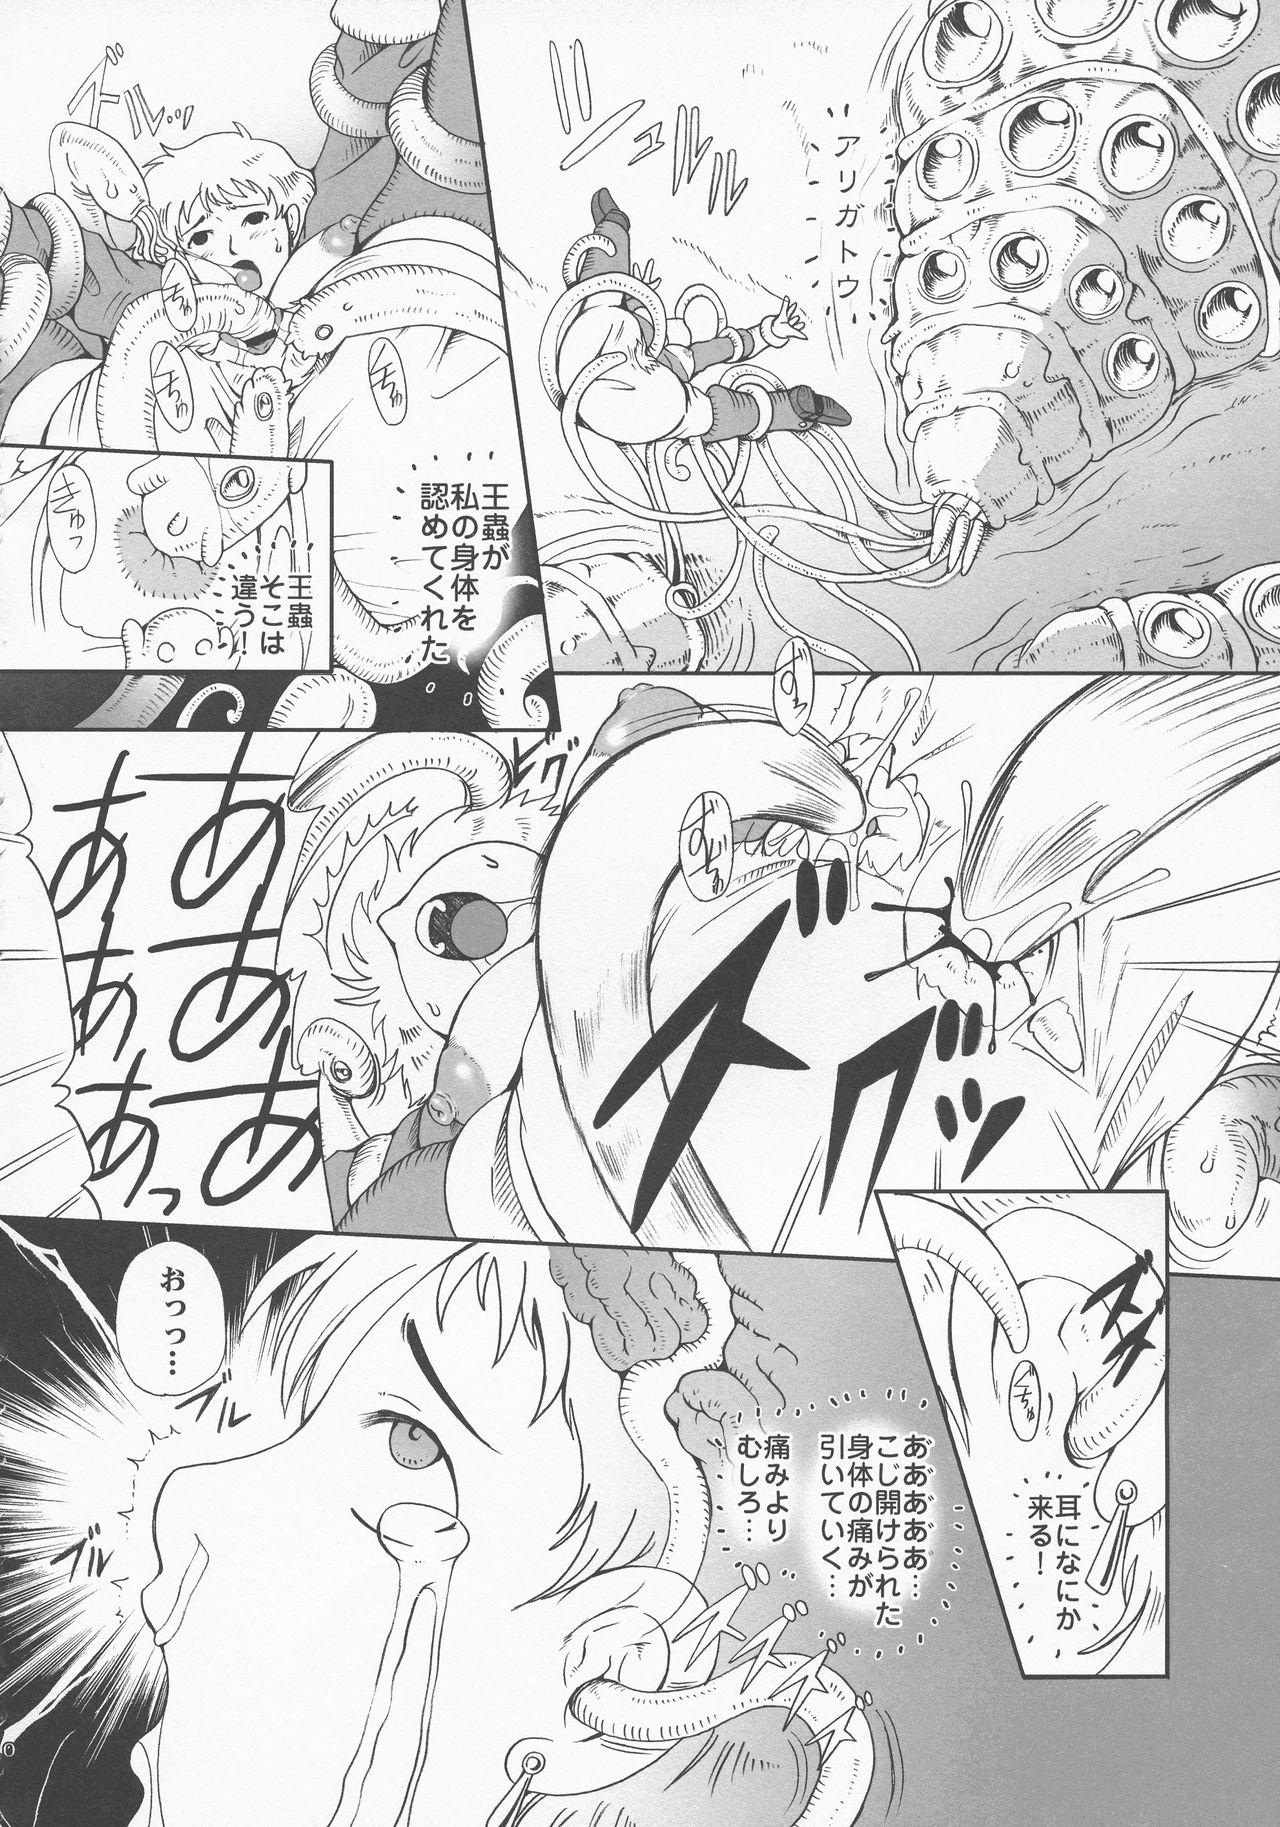 Hardcore Rough Sex Kusari Hime - Nausicaa of the valley of the wind Amateur Xxx - Page 10